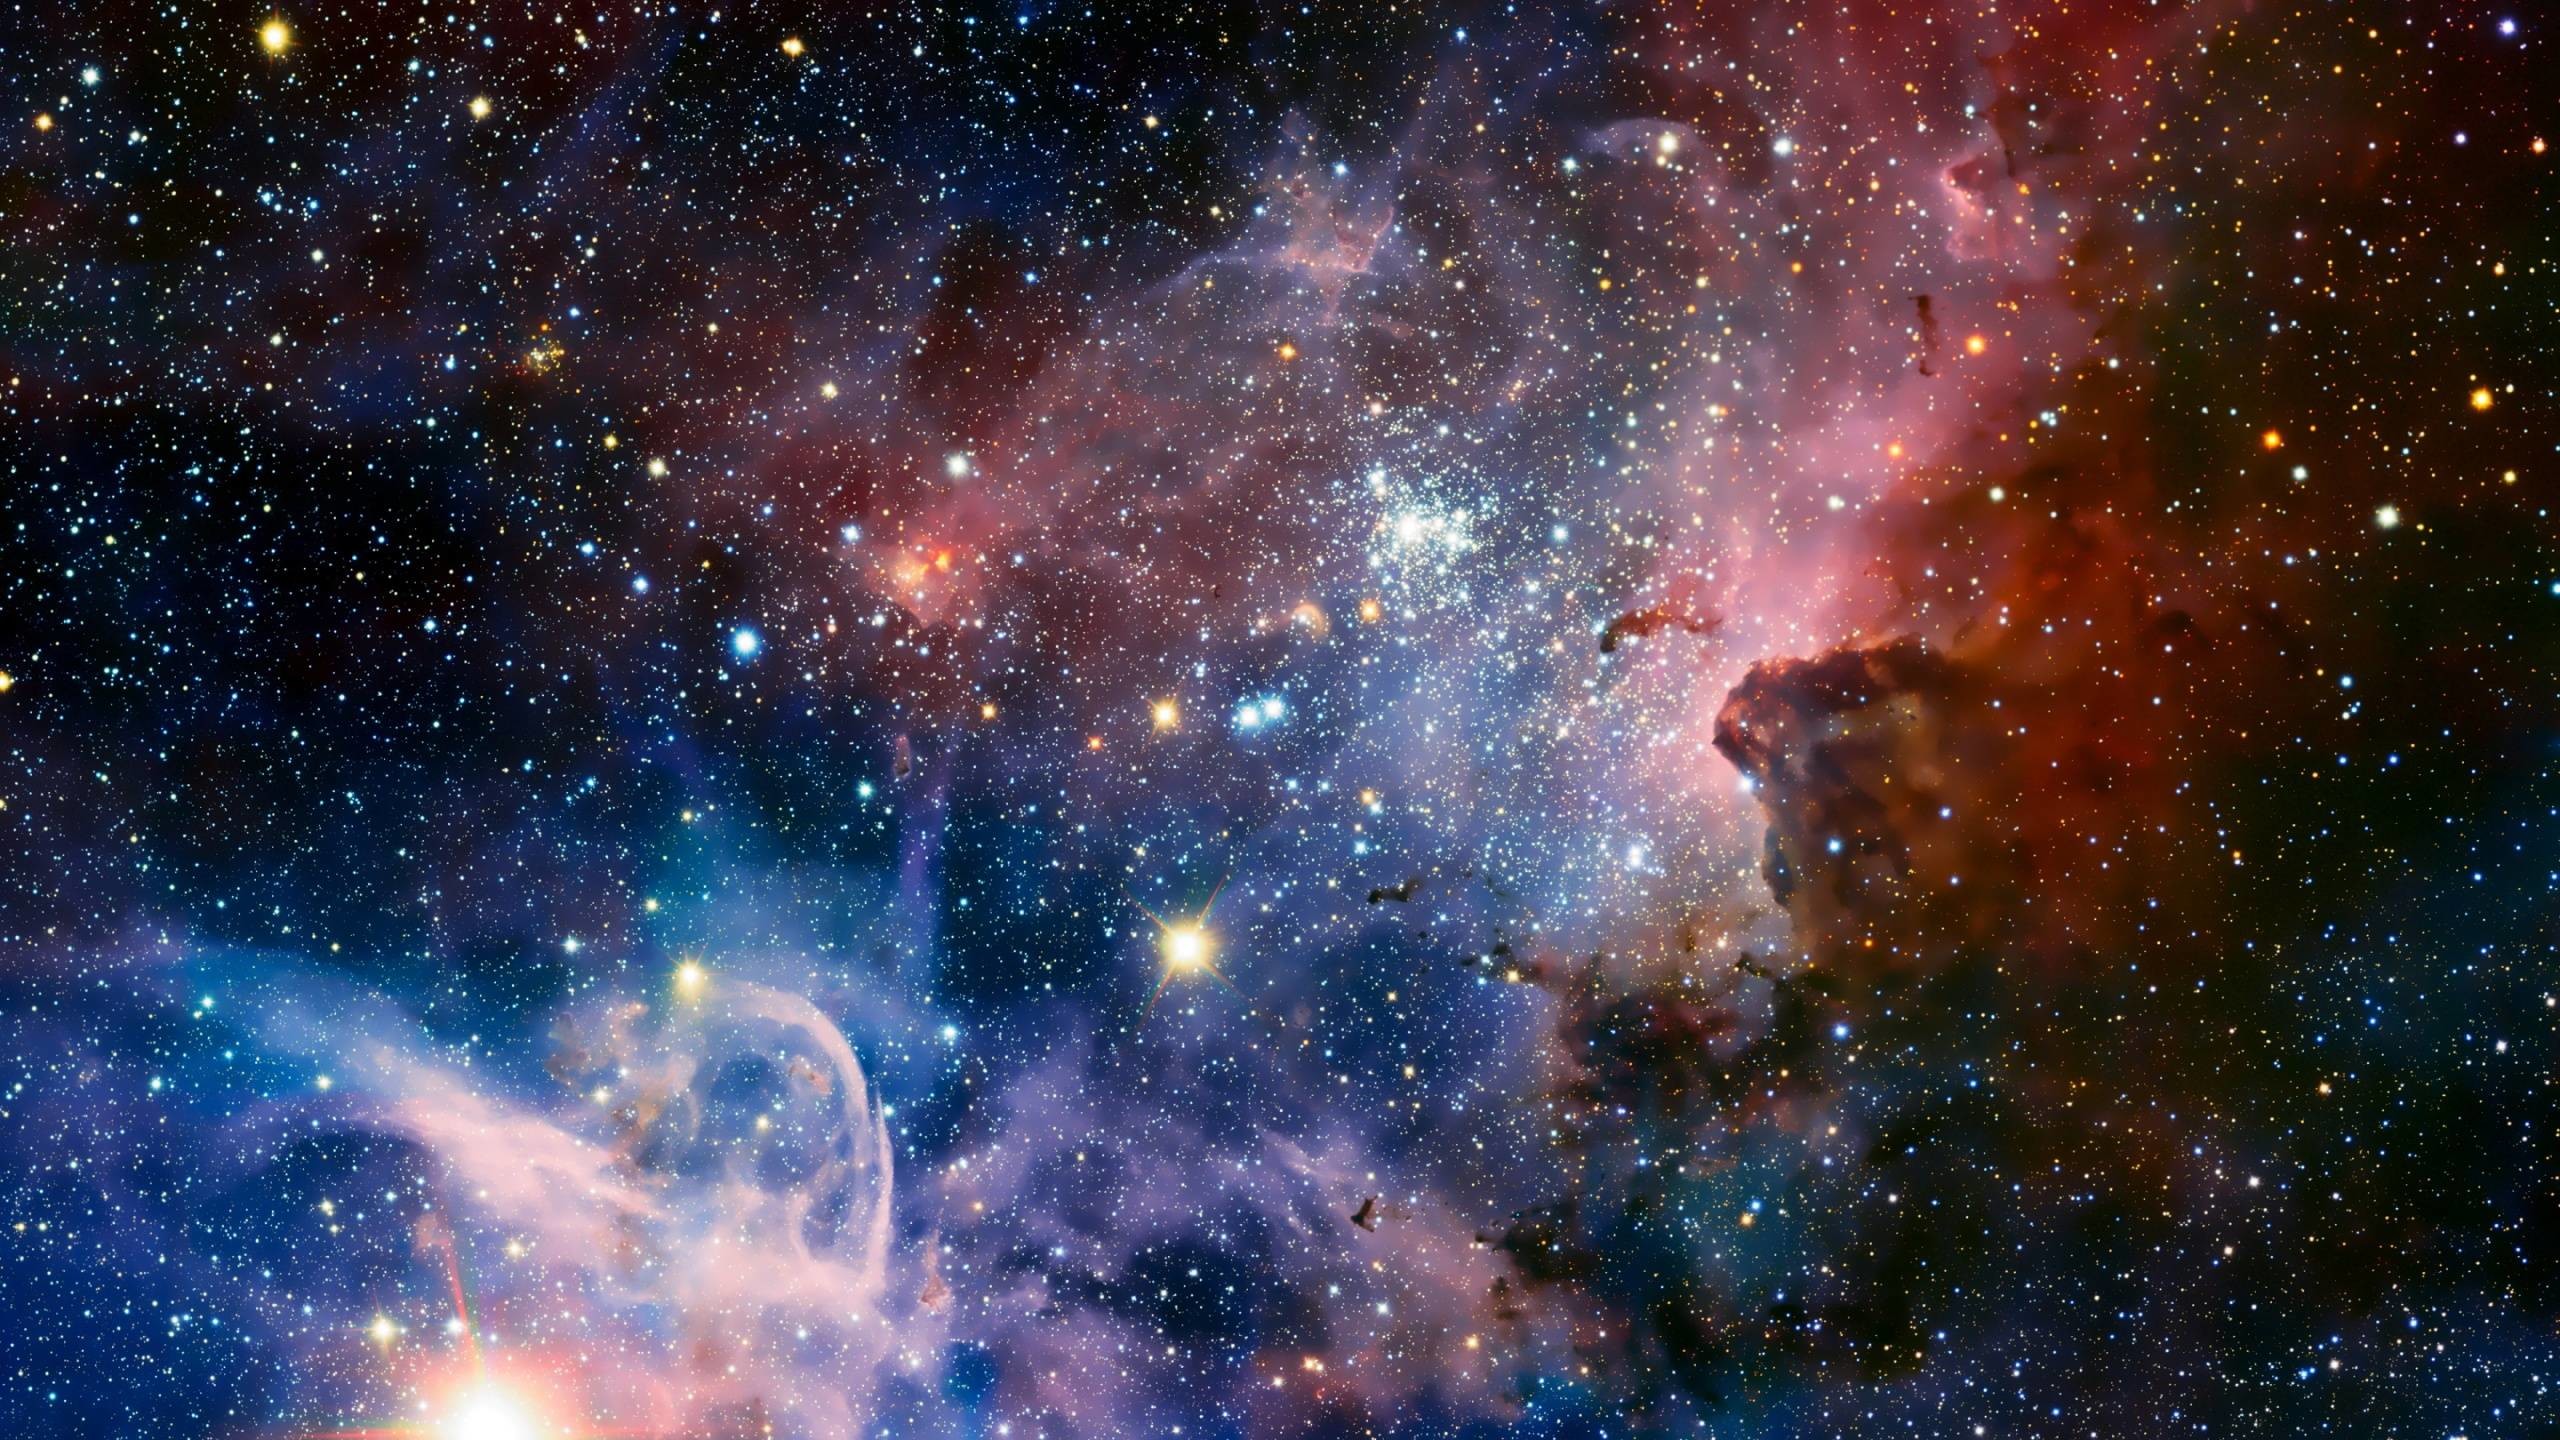 2560x1440 Wallpapers For > Cool Backgrounds Of Space With Stars